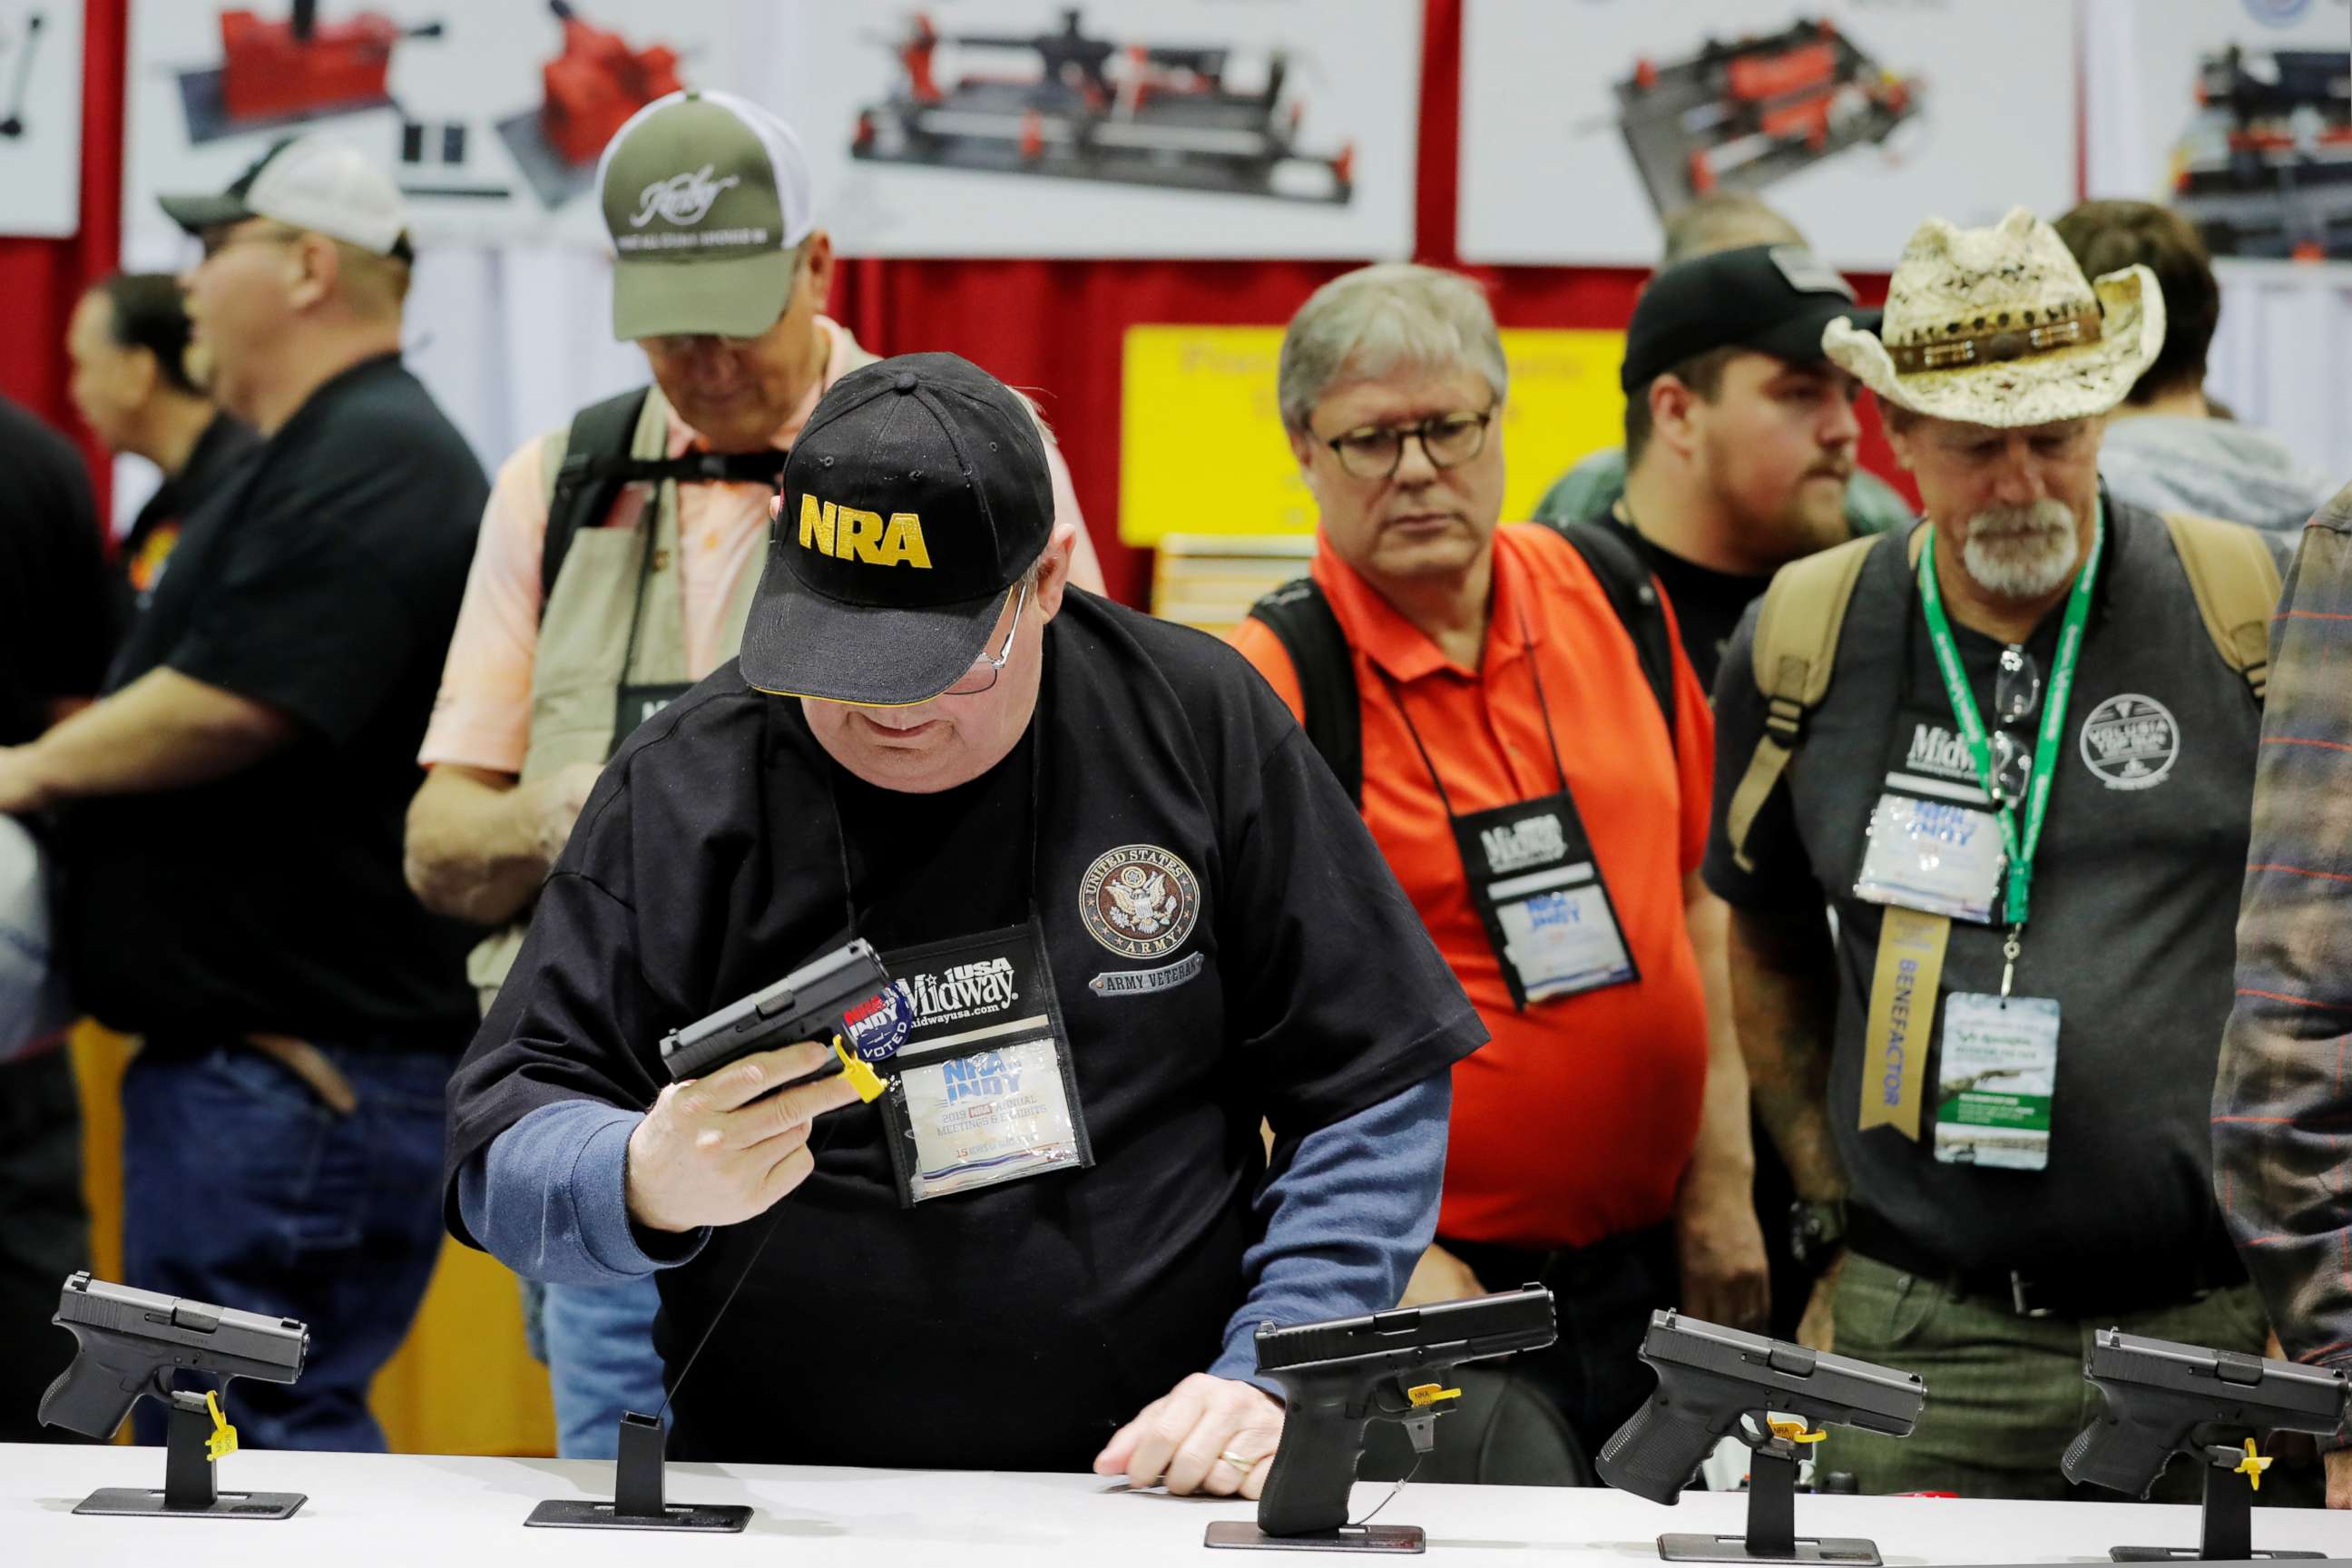 PHOTO: A man handles a Glock handgun during the National Rifle Association (NRA) annual meeting in Indianapolis, Indiana, U.S., April 27, 2019.  REUTERS/Lucas Jackson